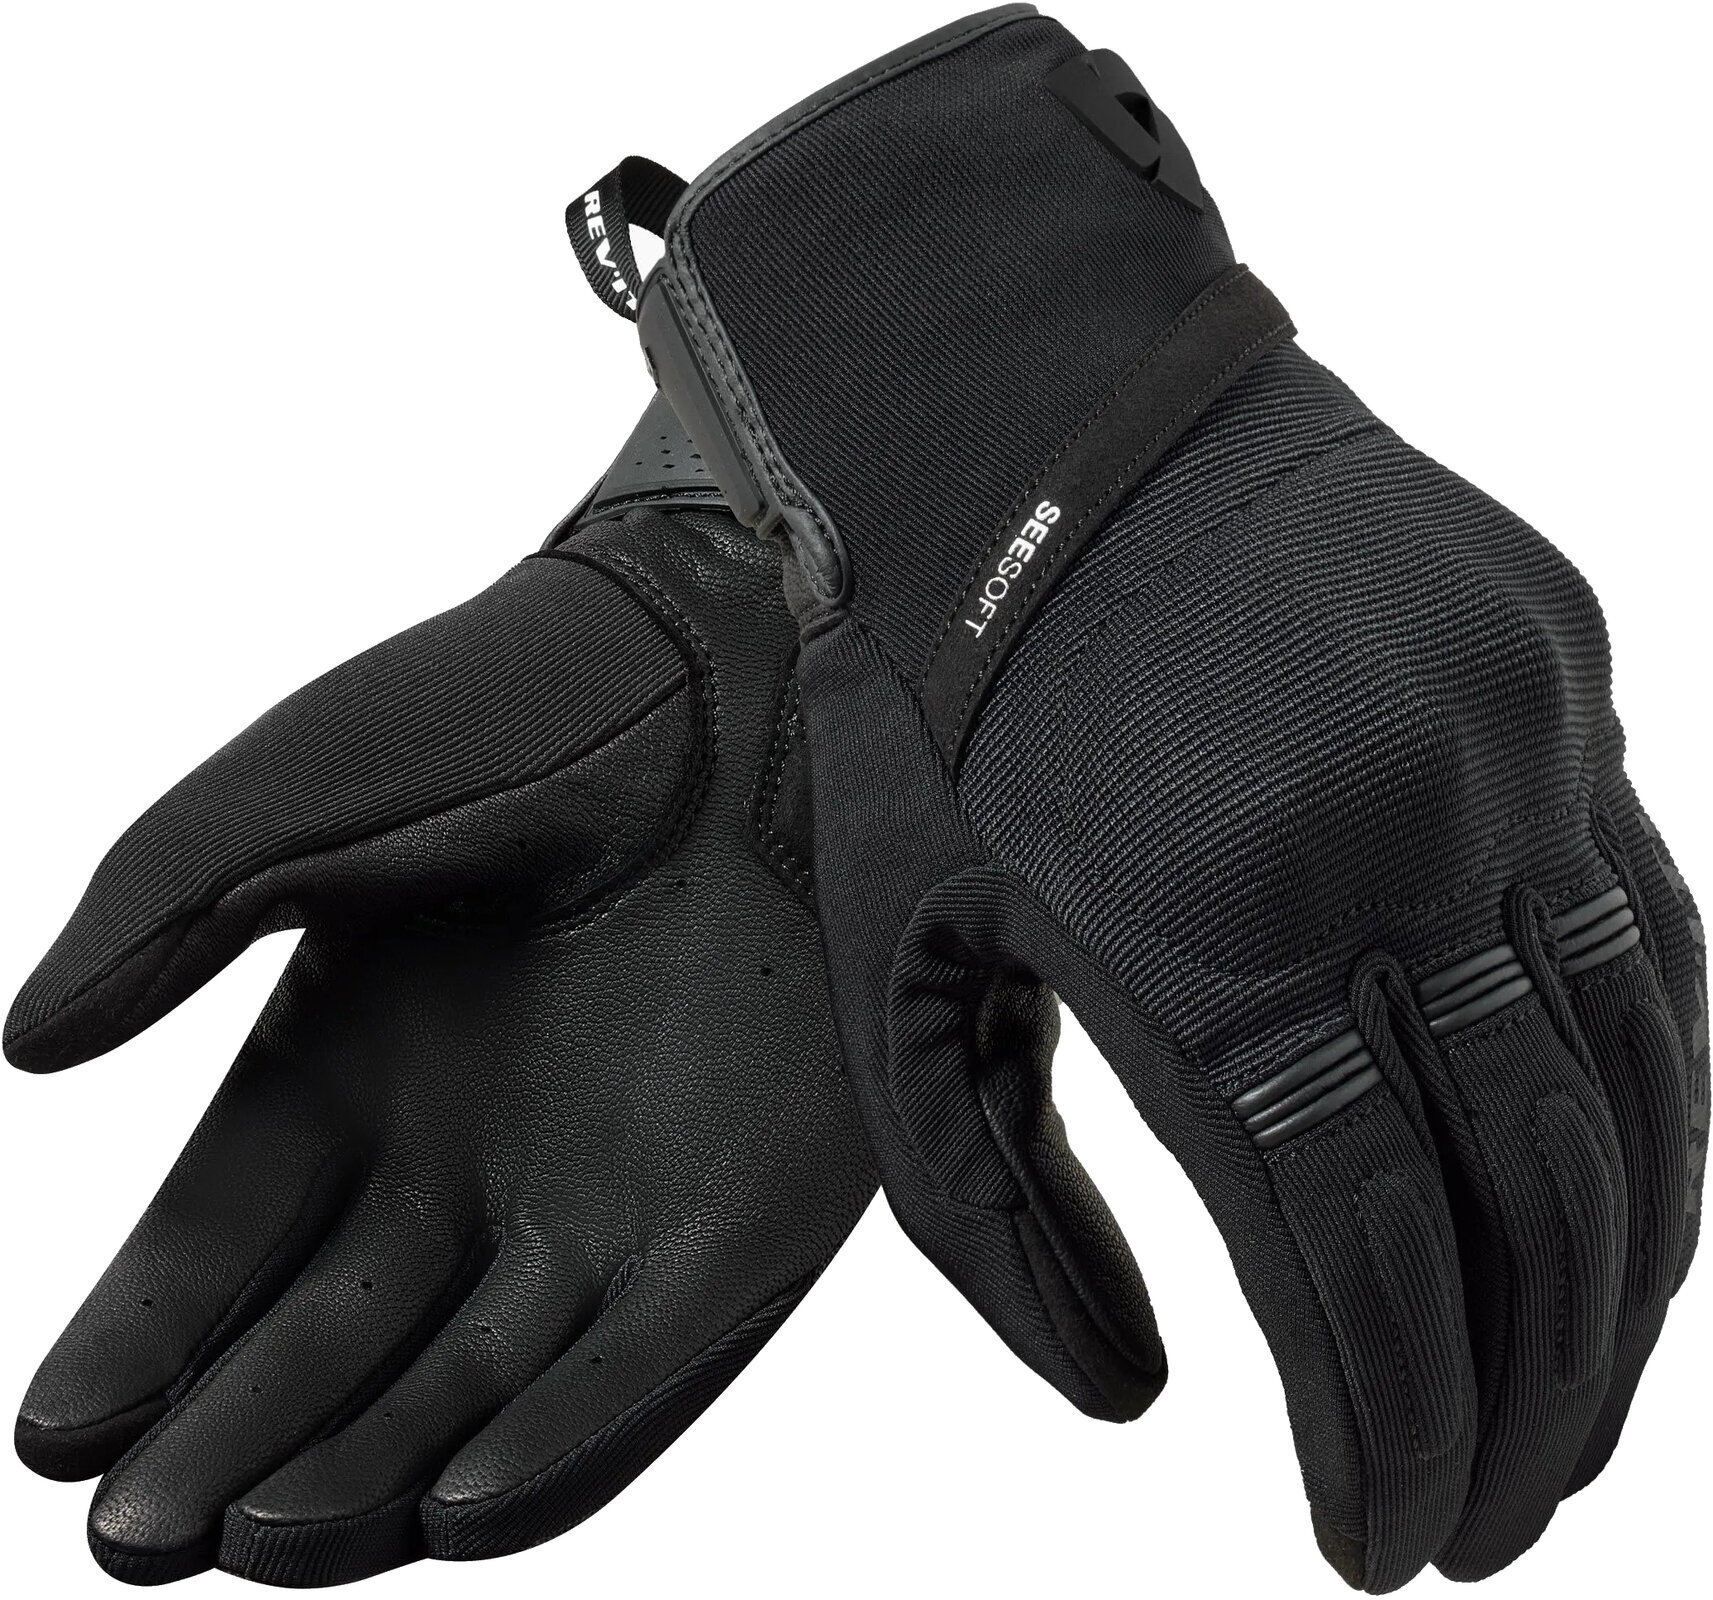 Motorcycle Gloves Rev'it! Gloves Mosca 2 Black XL Motorcycle Gloves